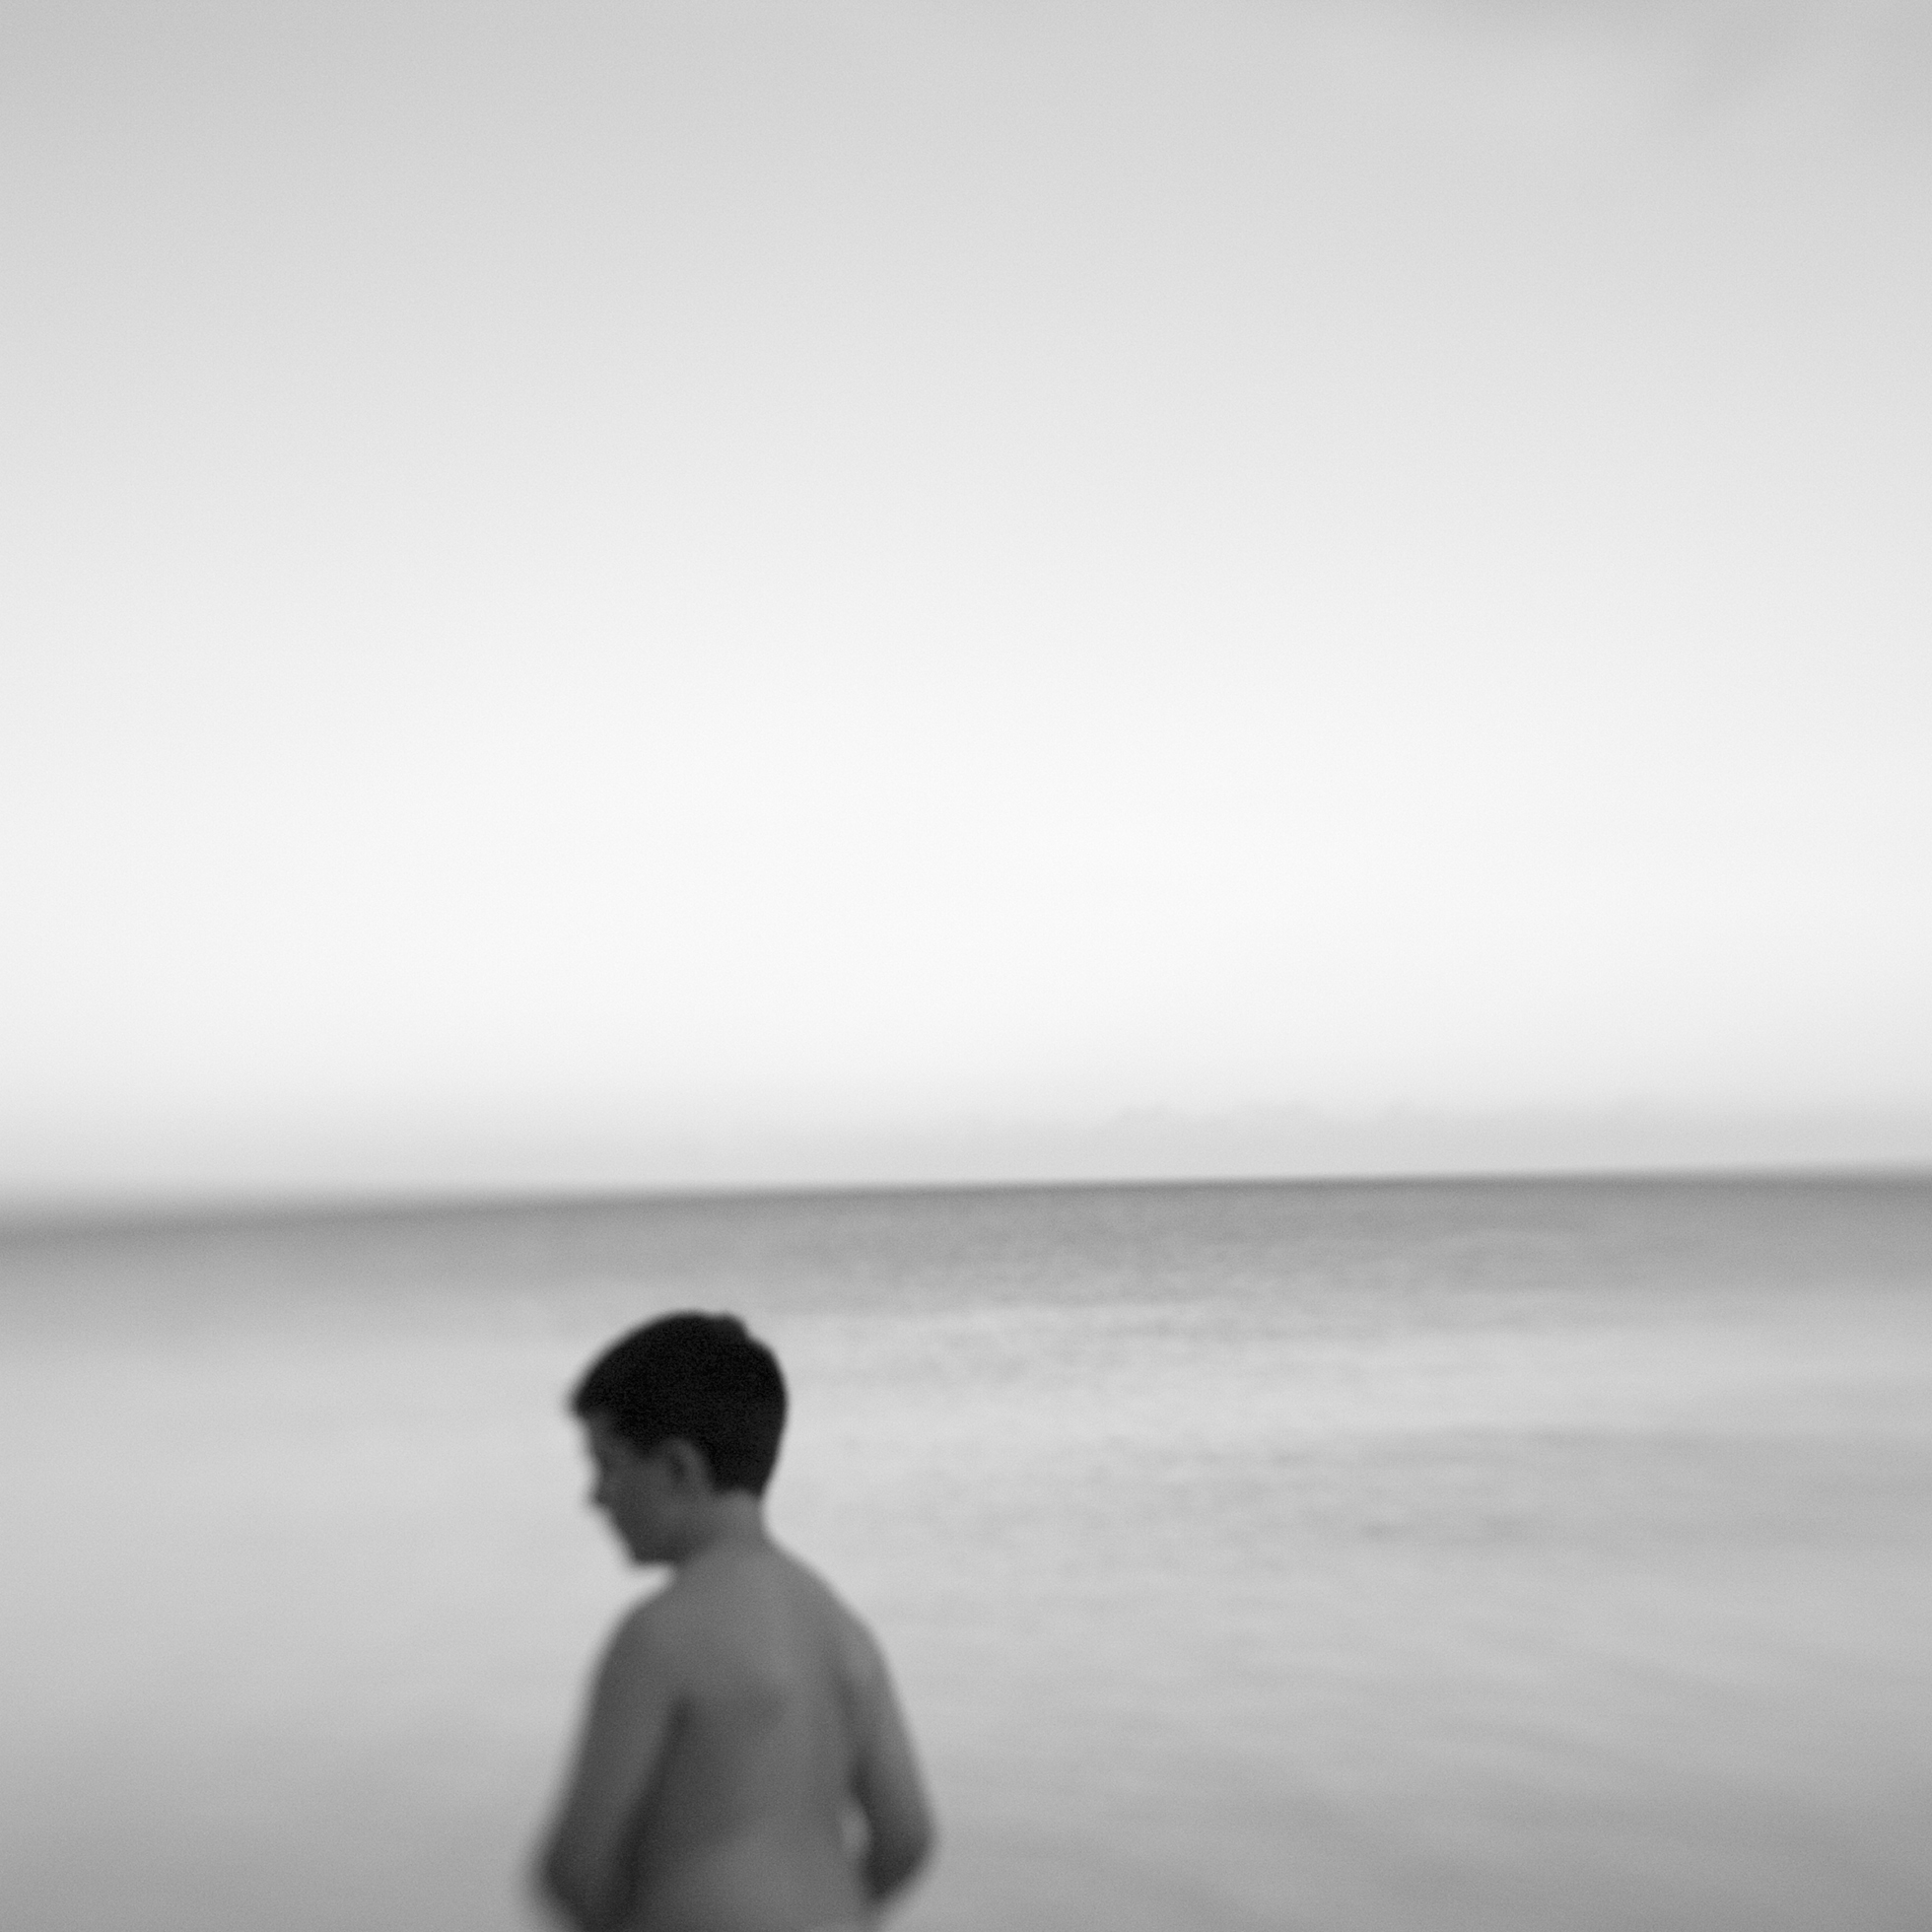 The top half of a shirtless boy in the foreground with a body of water to the horizon in the background.